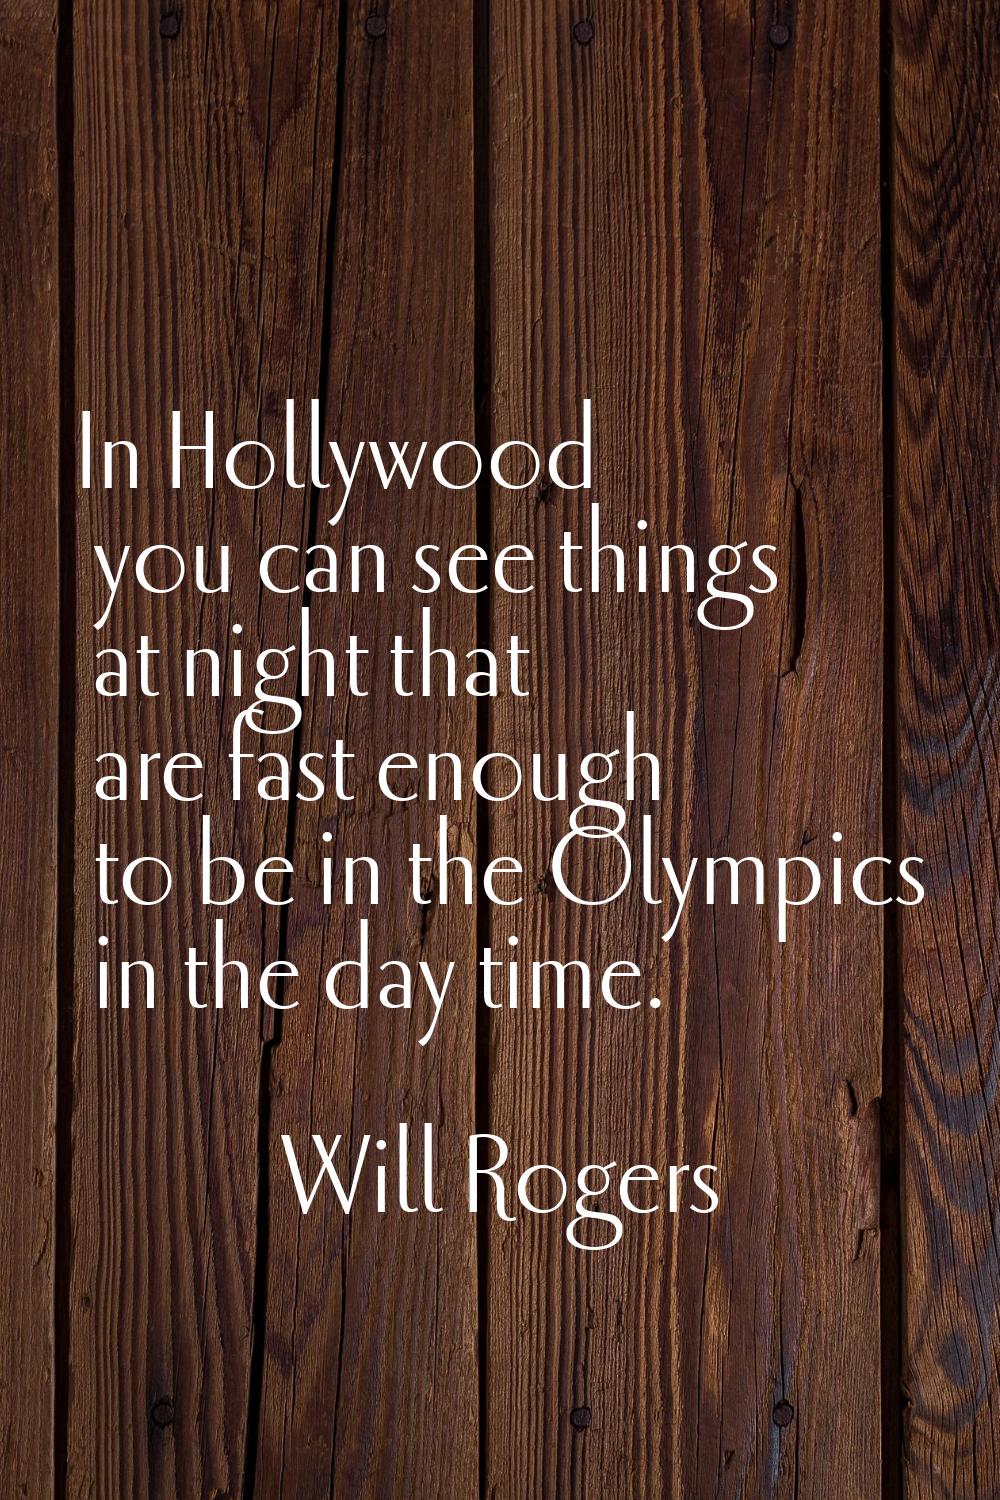 In Hollywood you can see things at night that are fast enough to be in the Olympics in the day time